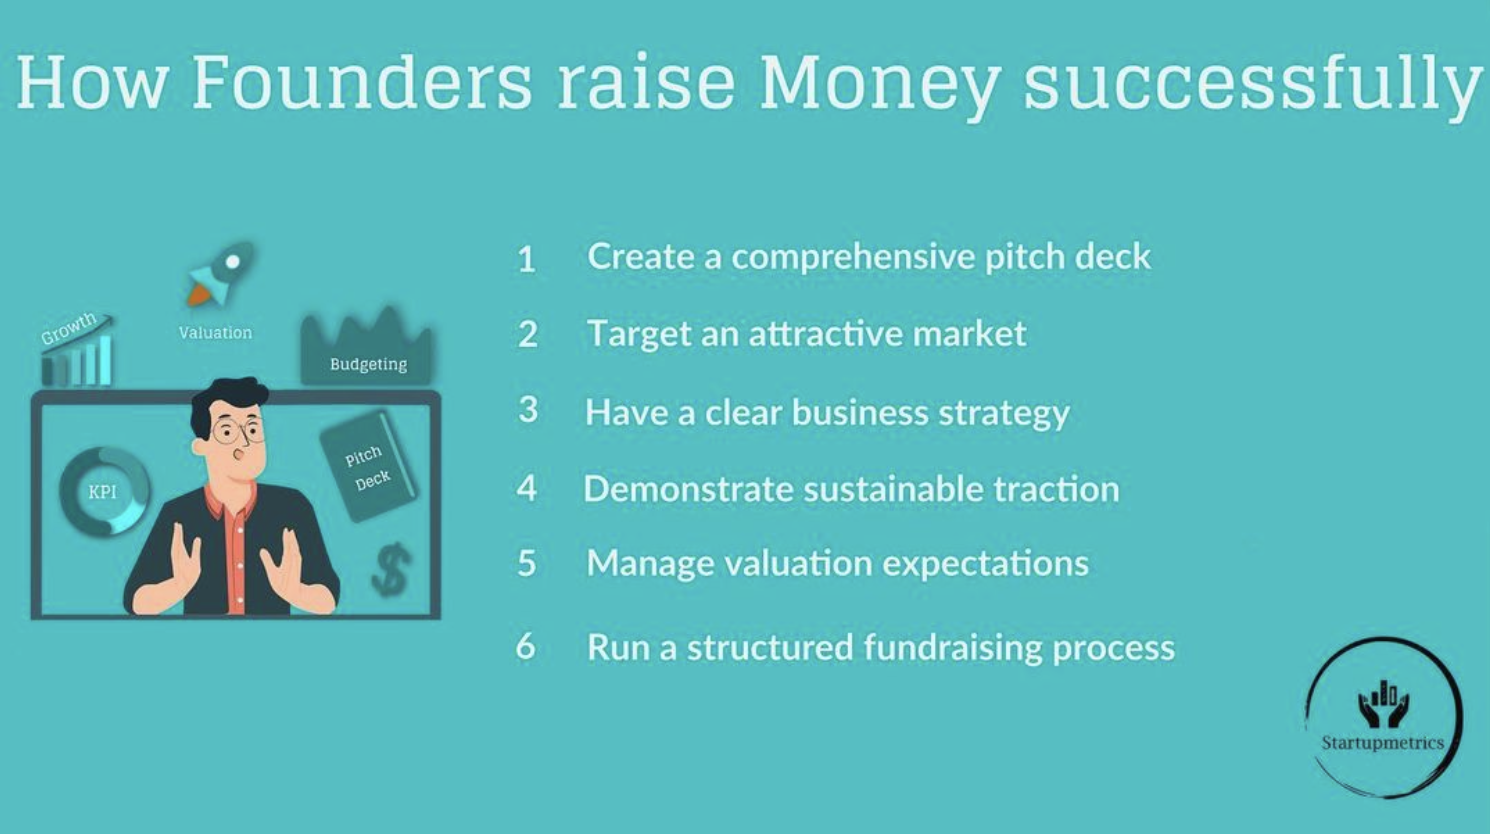 How founders raise startup fundraising successfully